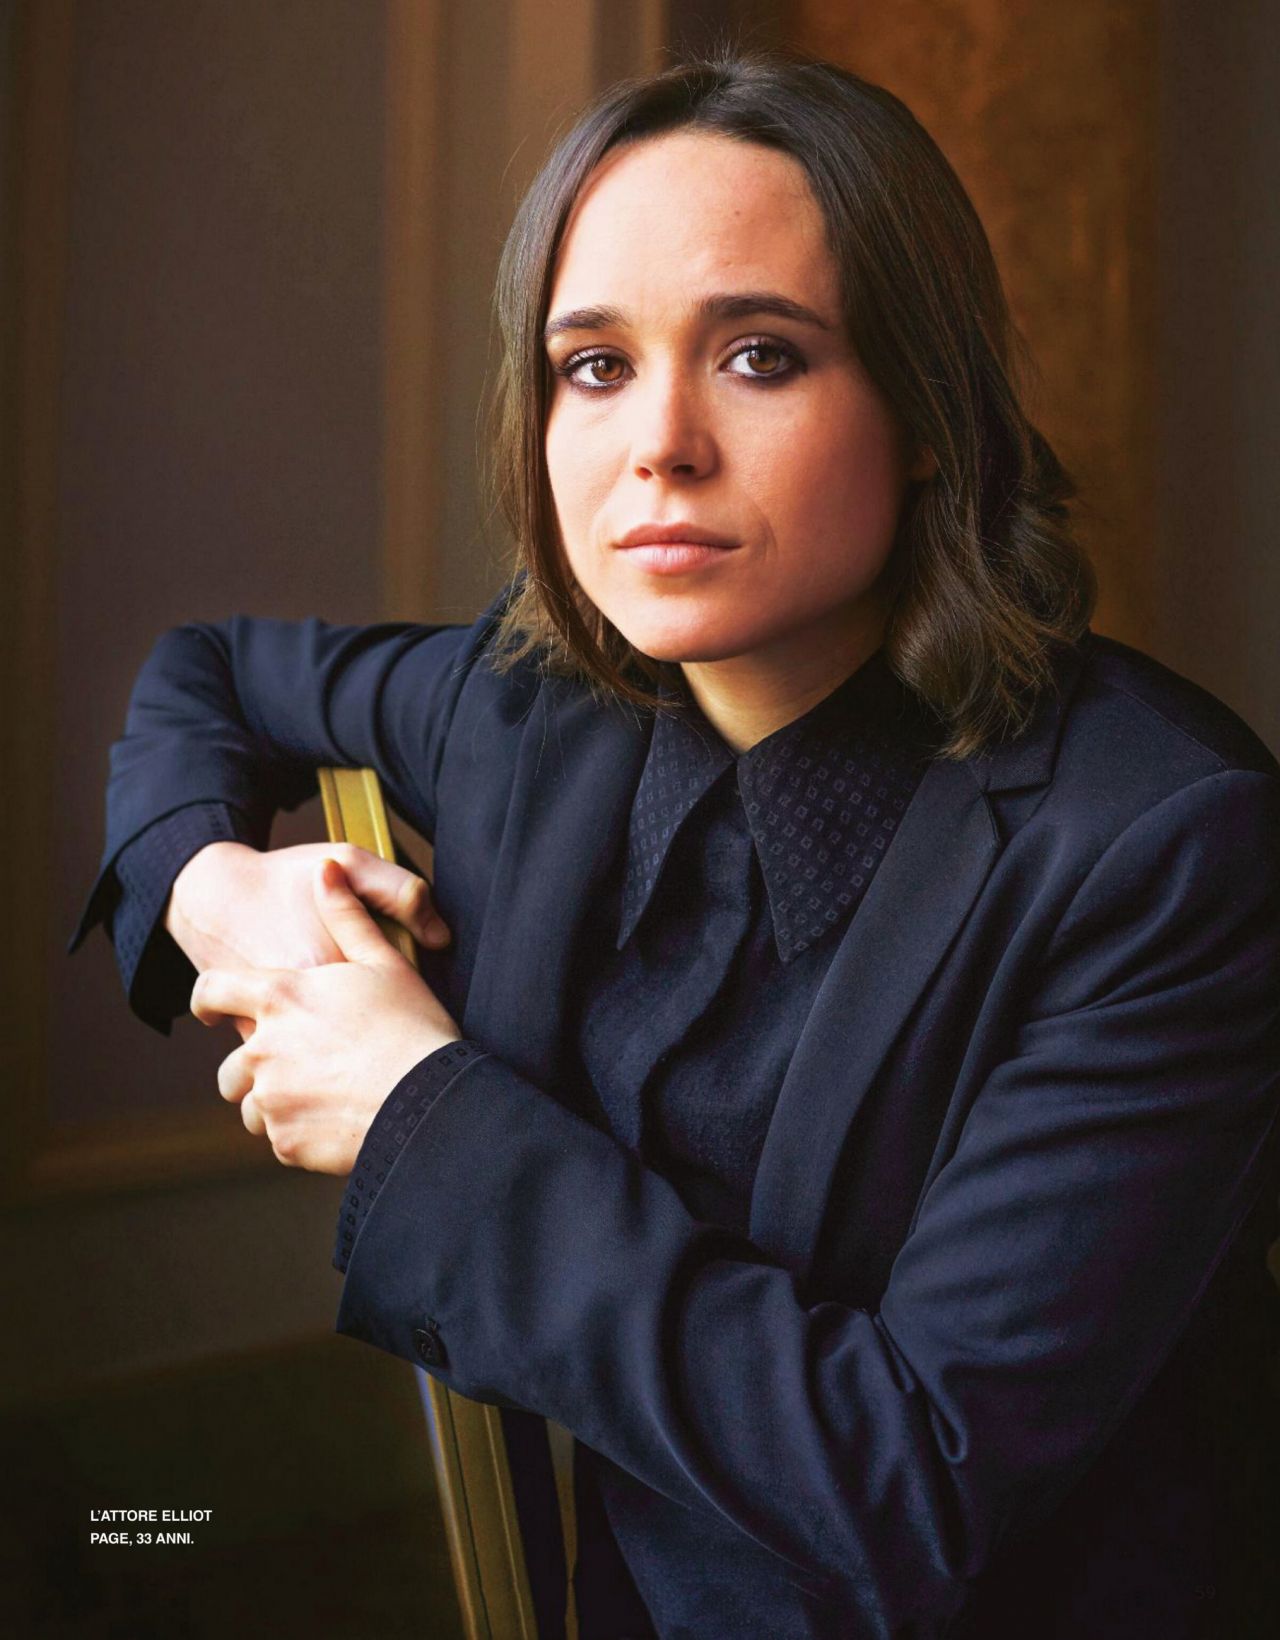 Ellen Page Style, Clothes, Outfits and Fashion • CelebMafia